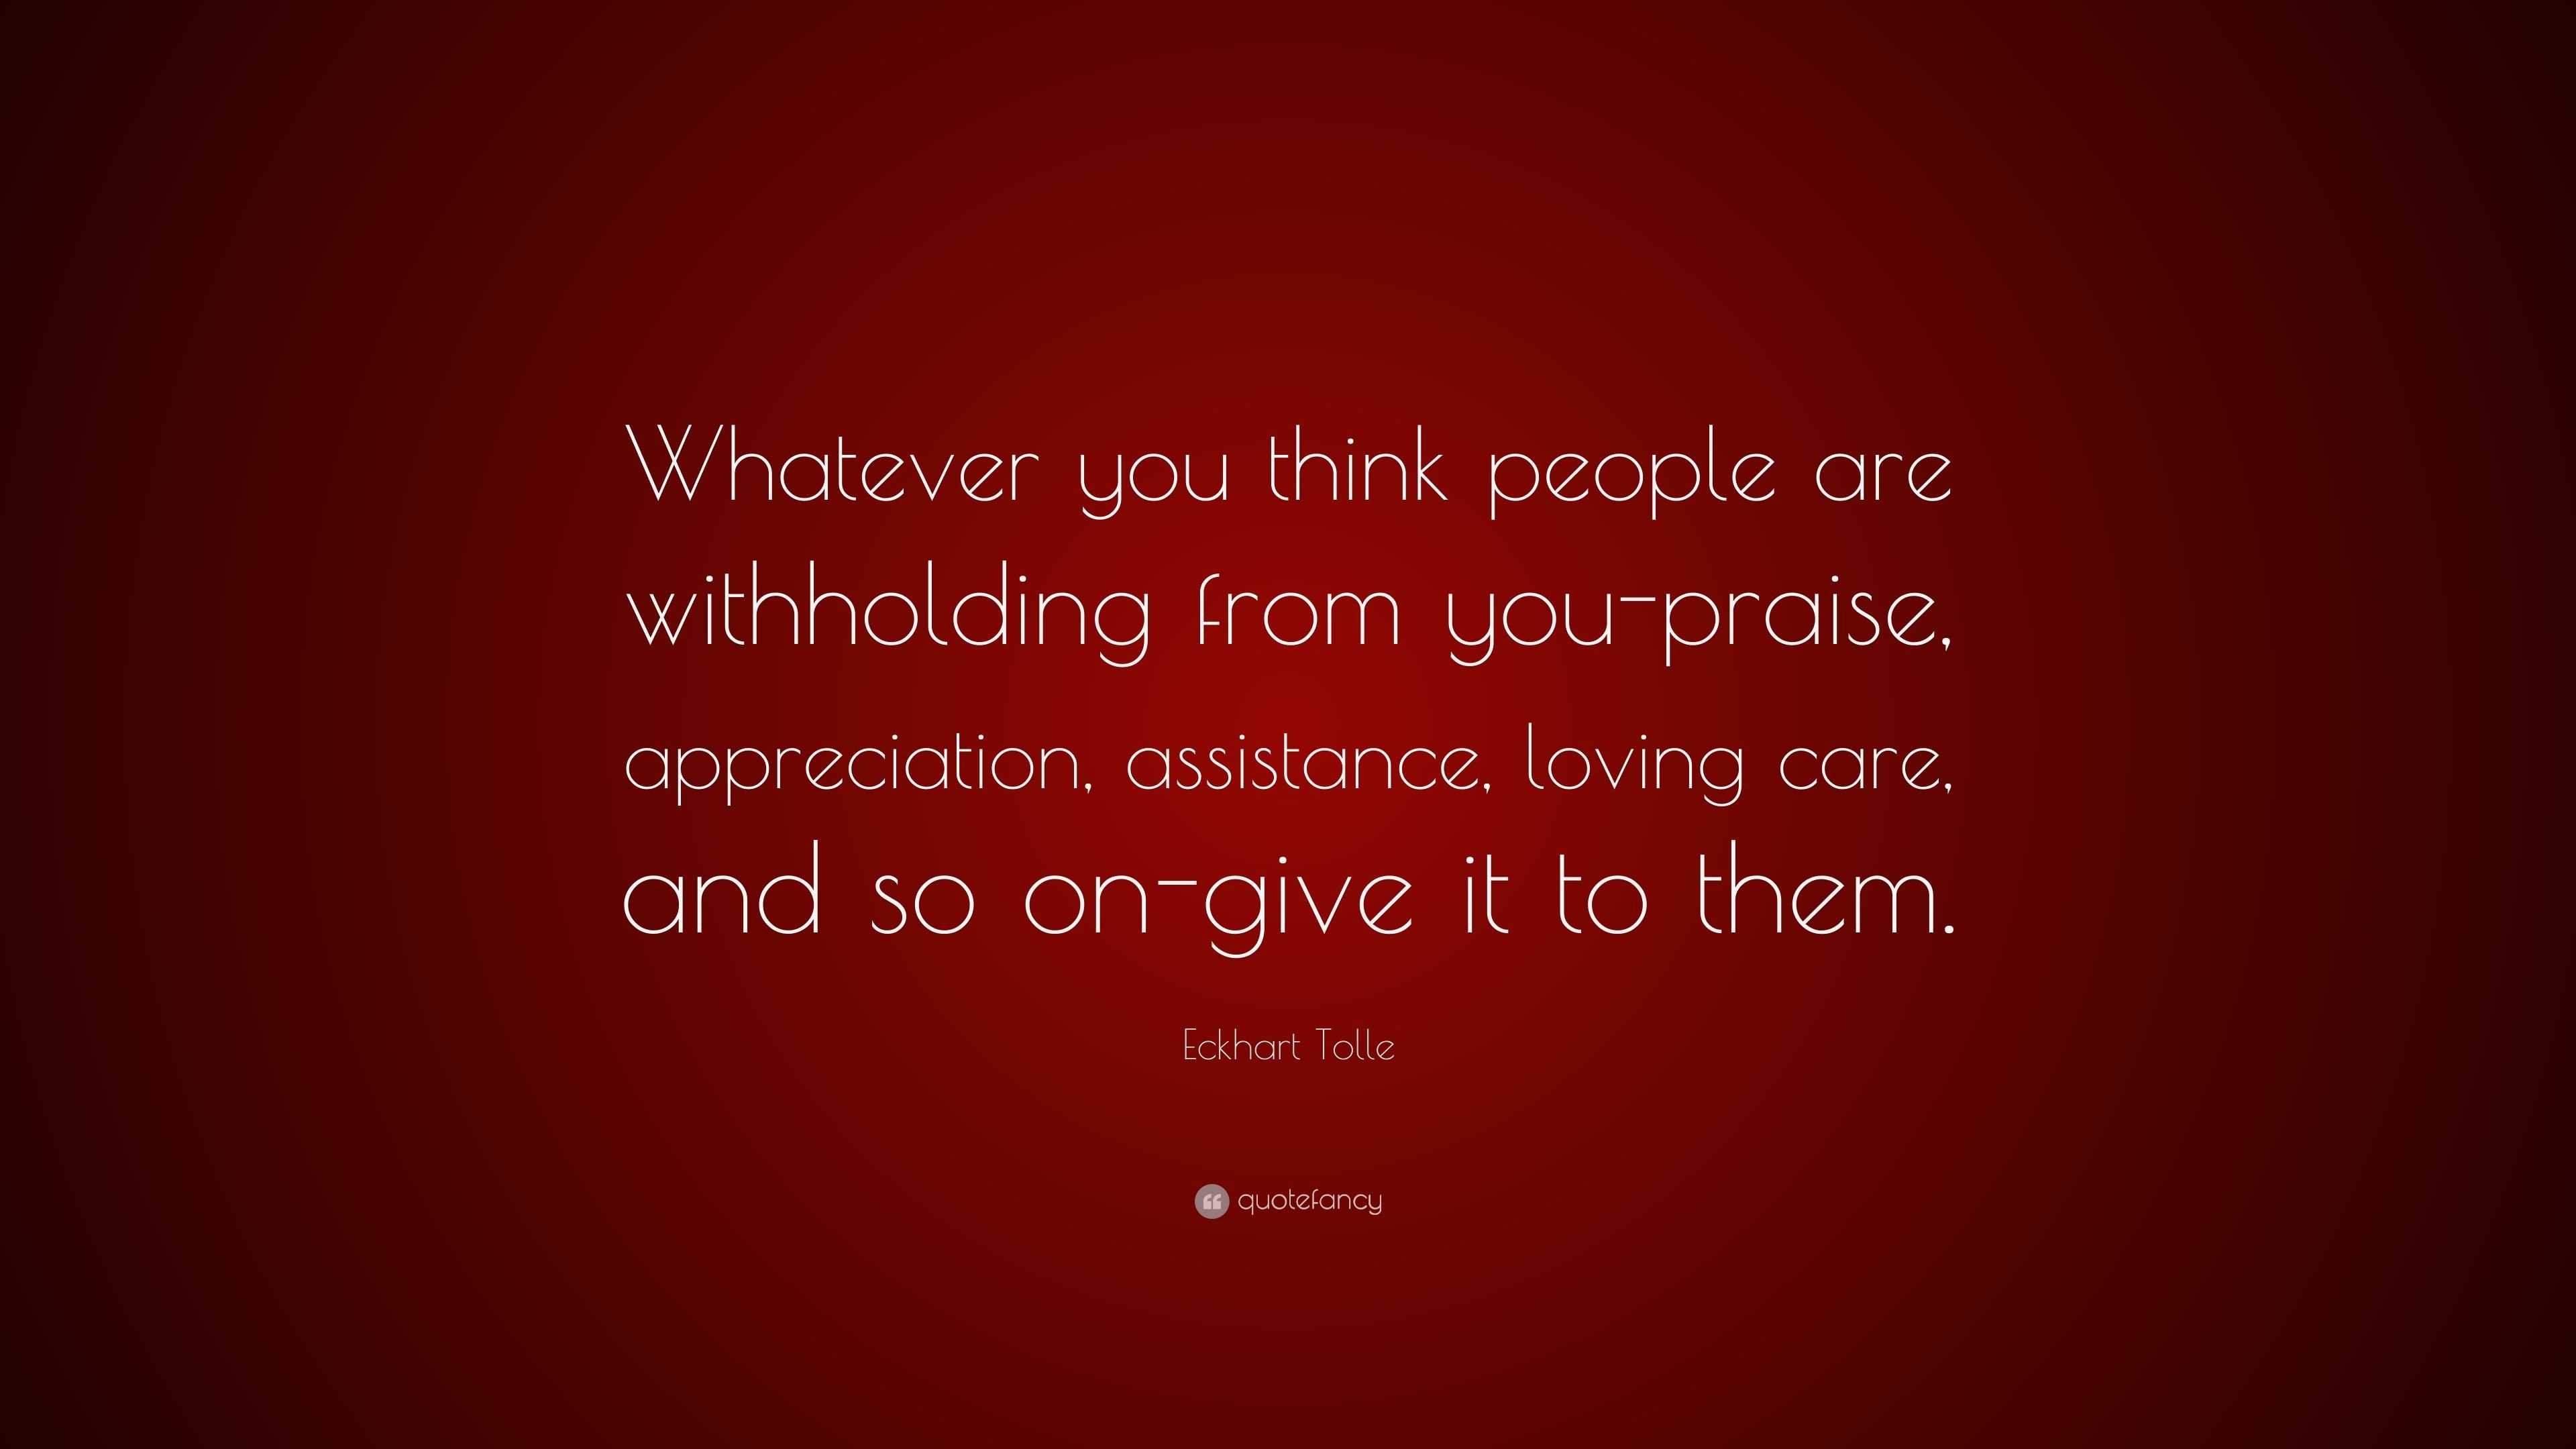 Eckhart Tolle Quote: “Whatever you think people are withholding from ...